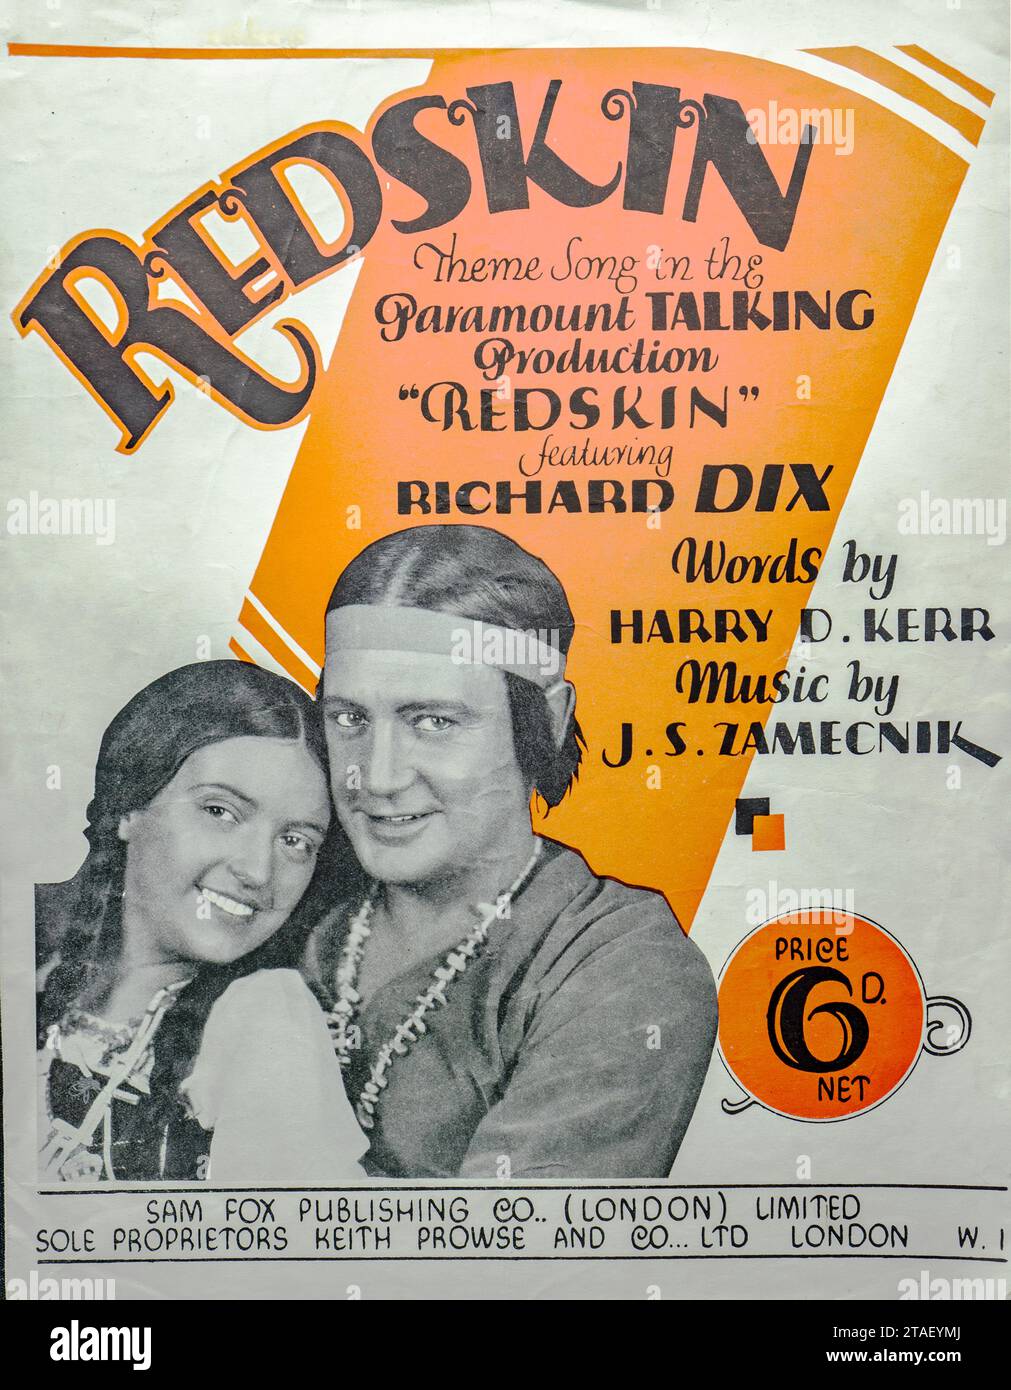 1920s film music sheet featuring Richard Dix and Native American imagery. Cinematic Music Sheet - ''Redskin' Theme Song”.. Stock Photo